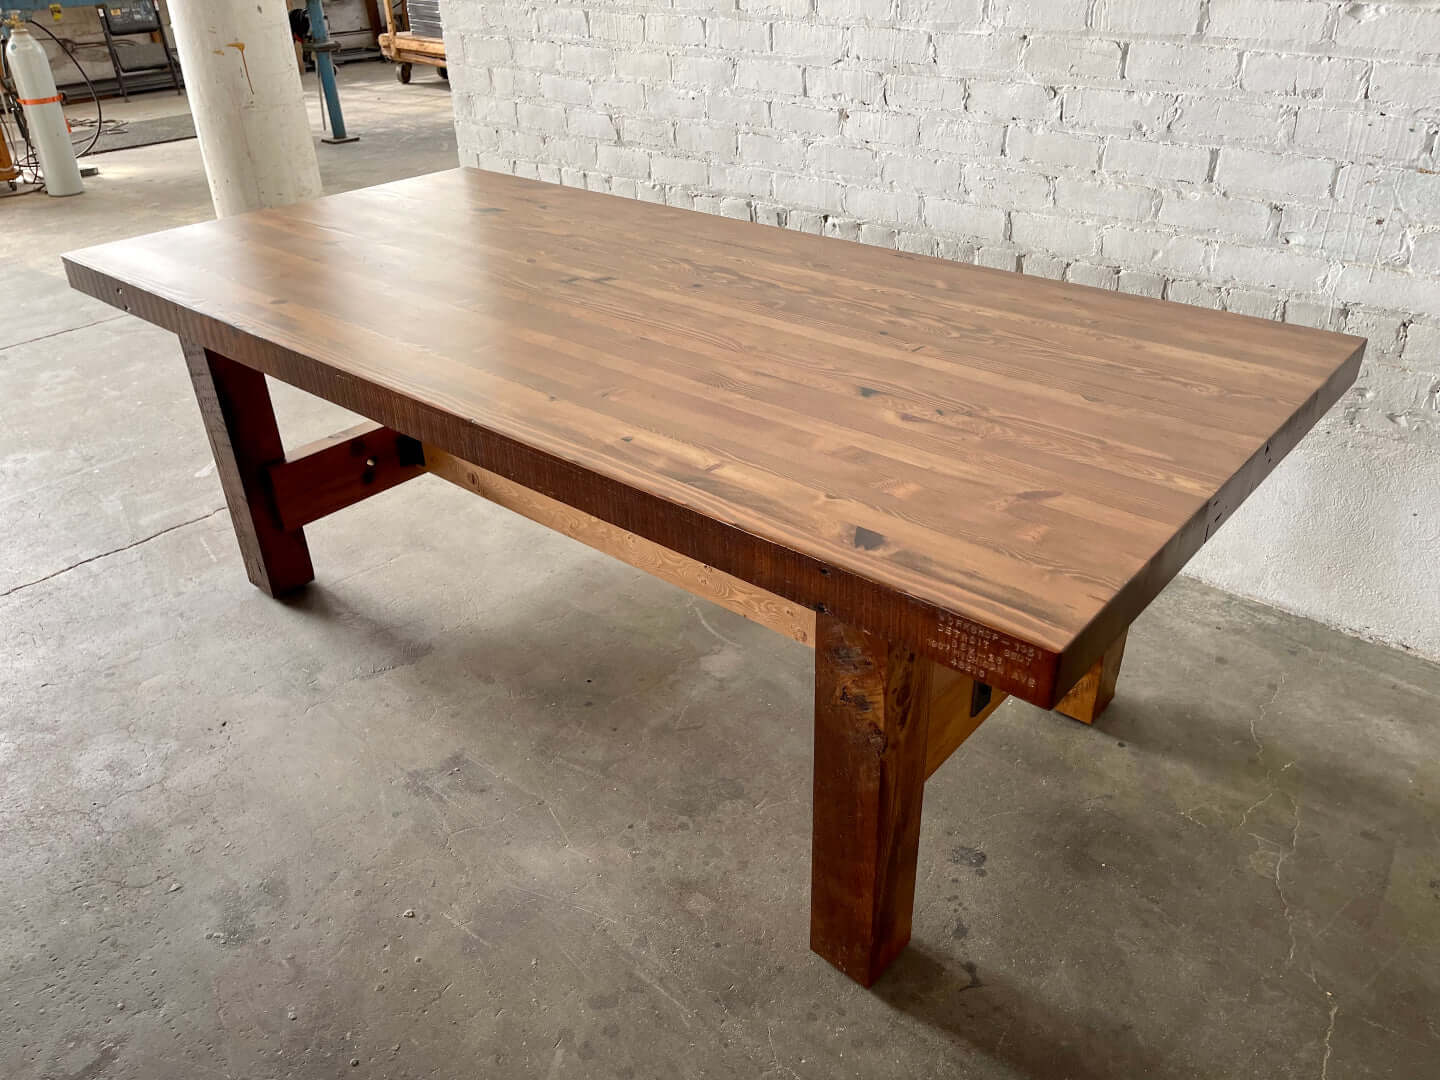 Ambassador Dining Table - Cherry Stain Finish